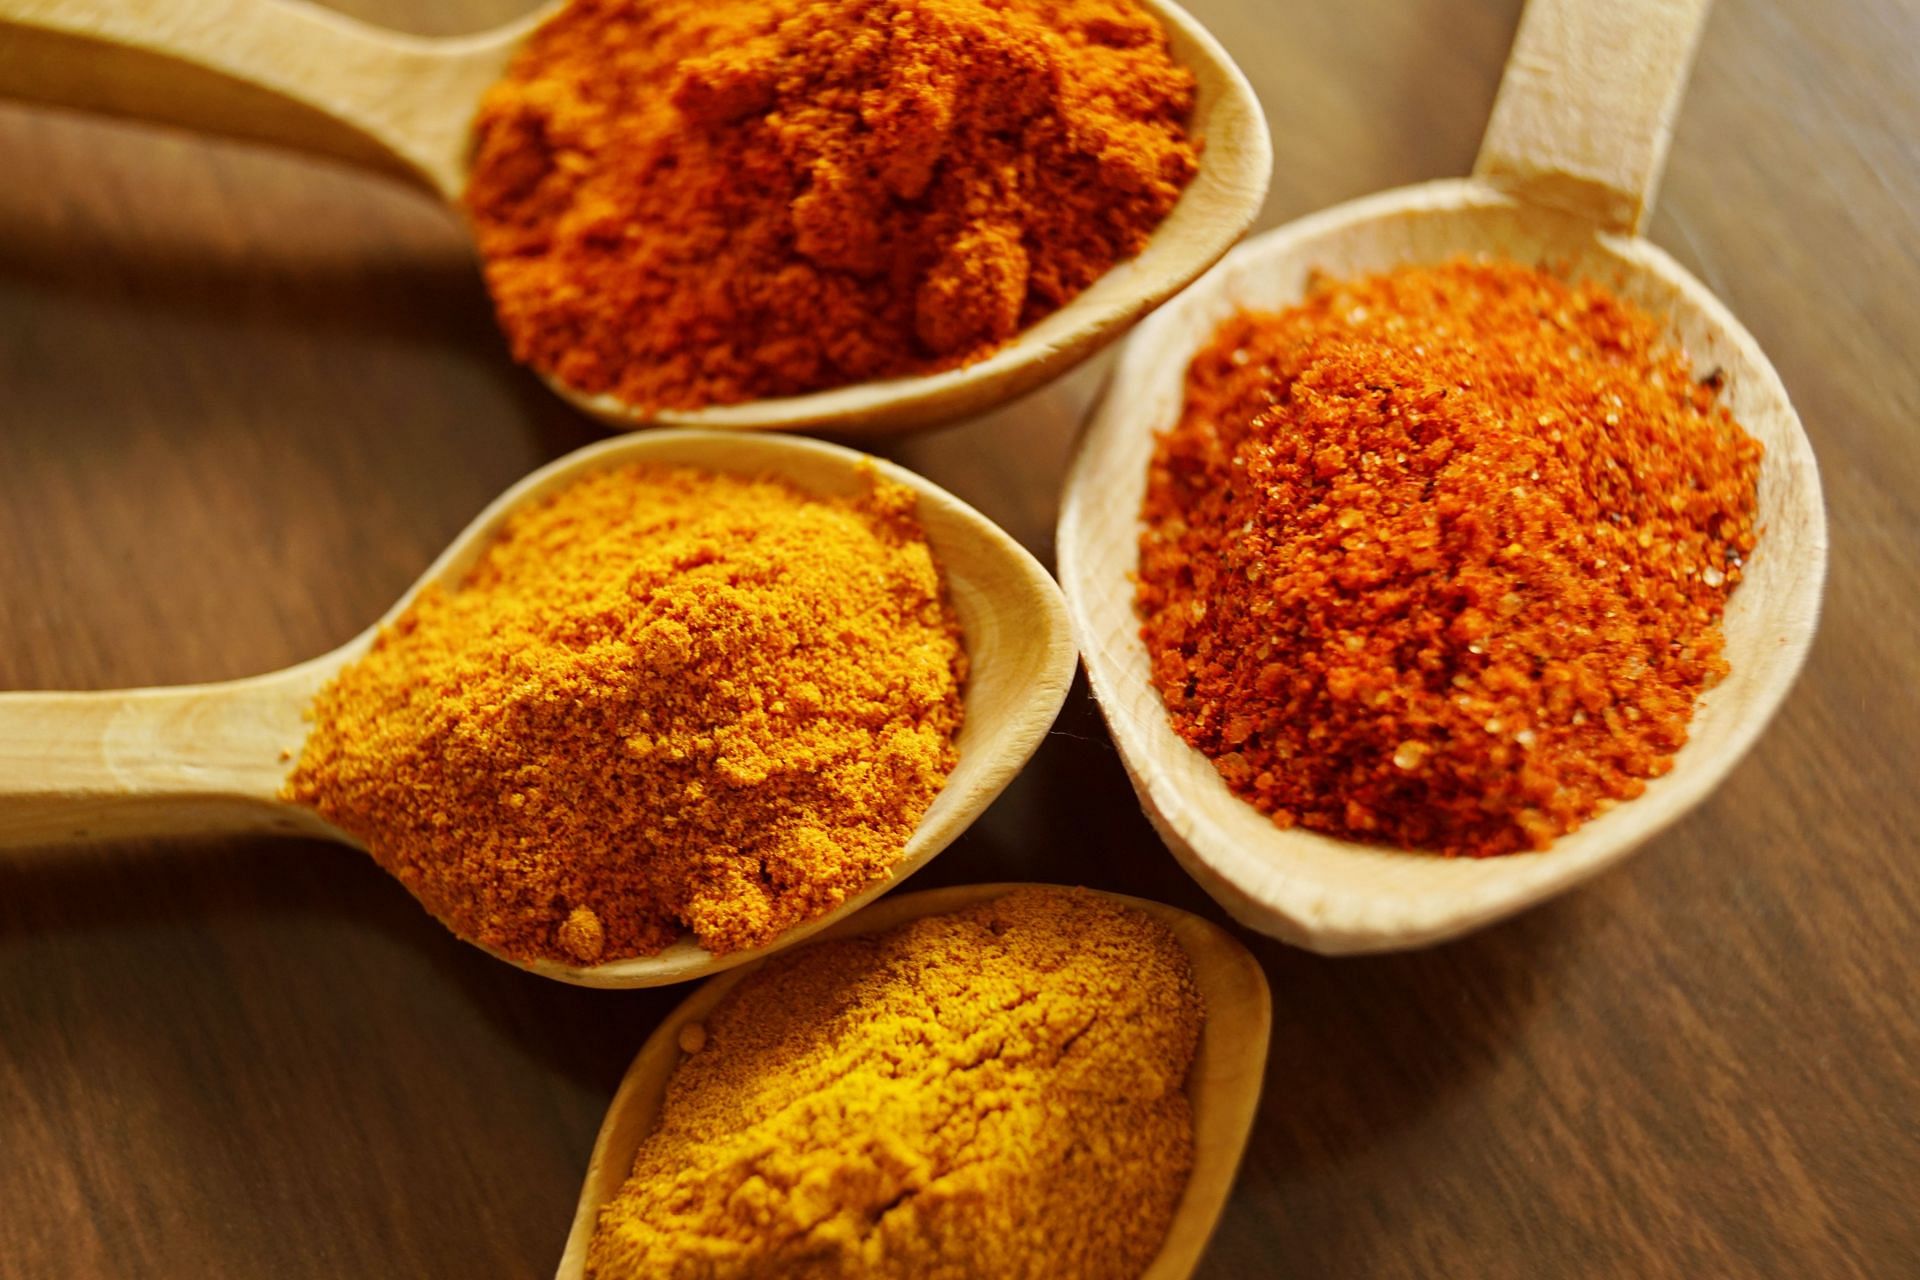 Understanding impact of spices on ulcers (Image via Pexels)